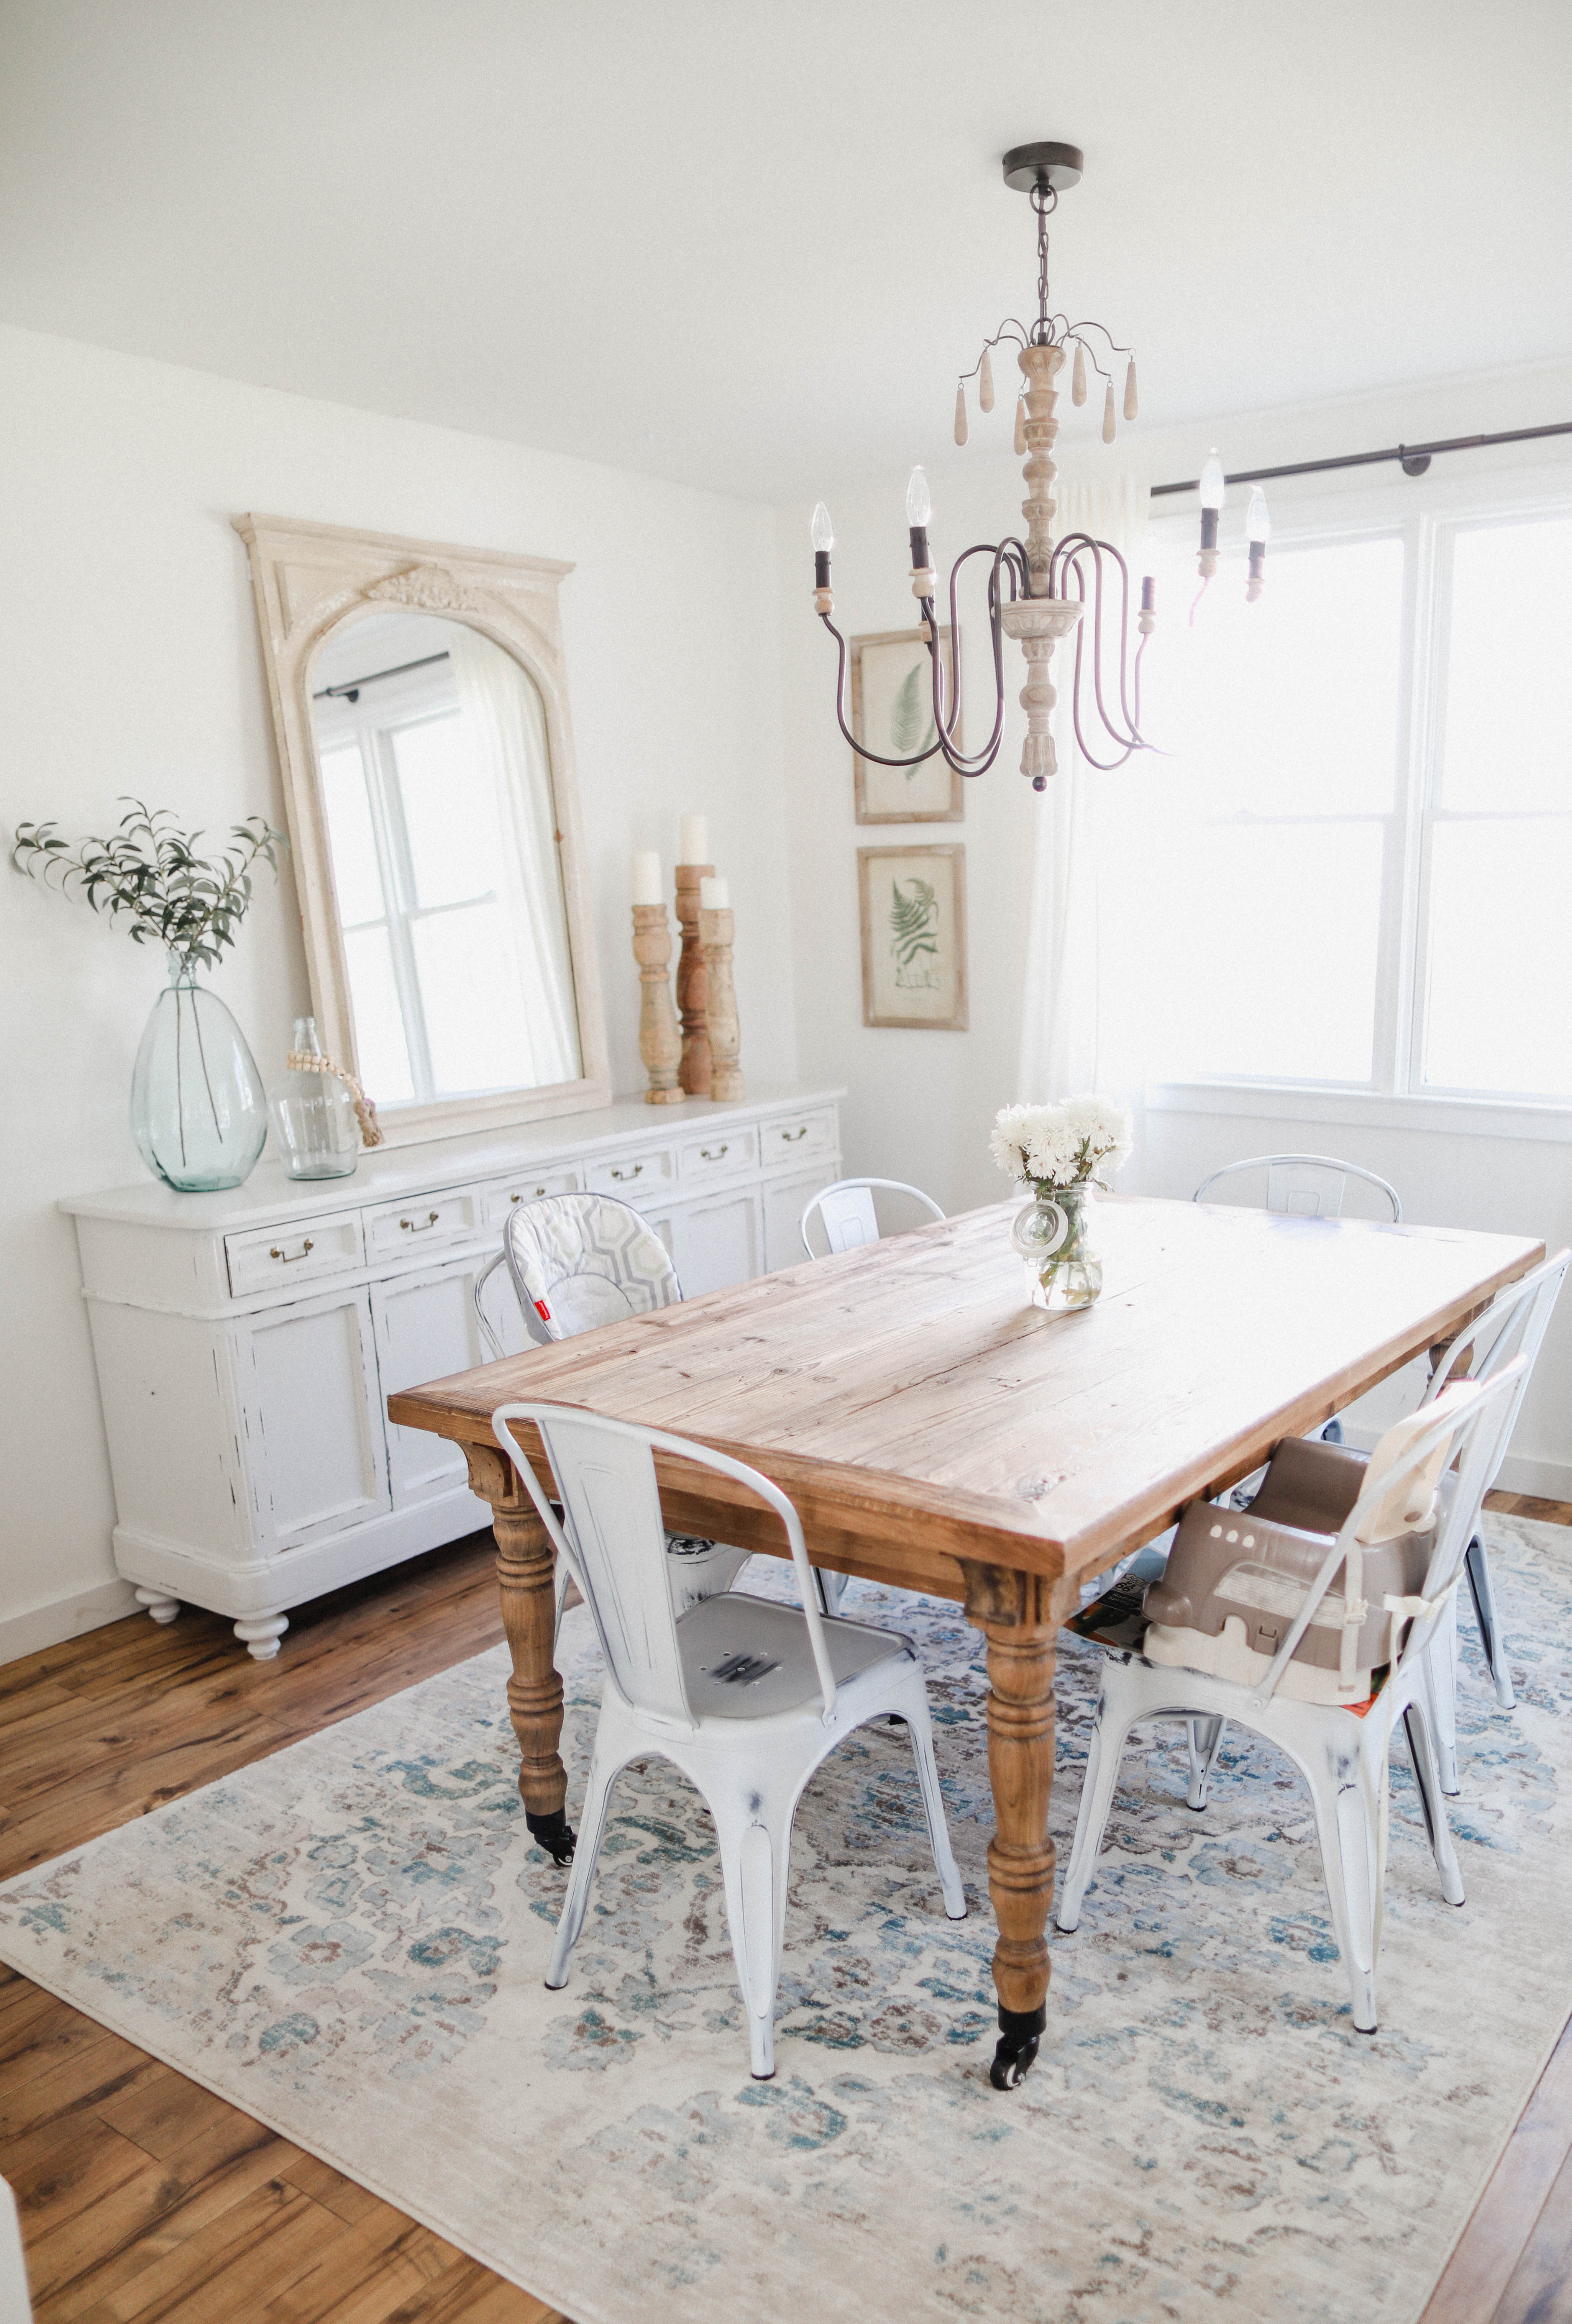 Life and style blogger Lauren McBride shares her Spring Cottage Dining Room complete with a list of sources, and including some budget friendly items.